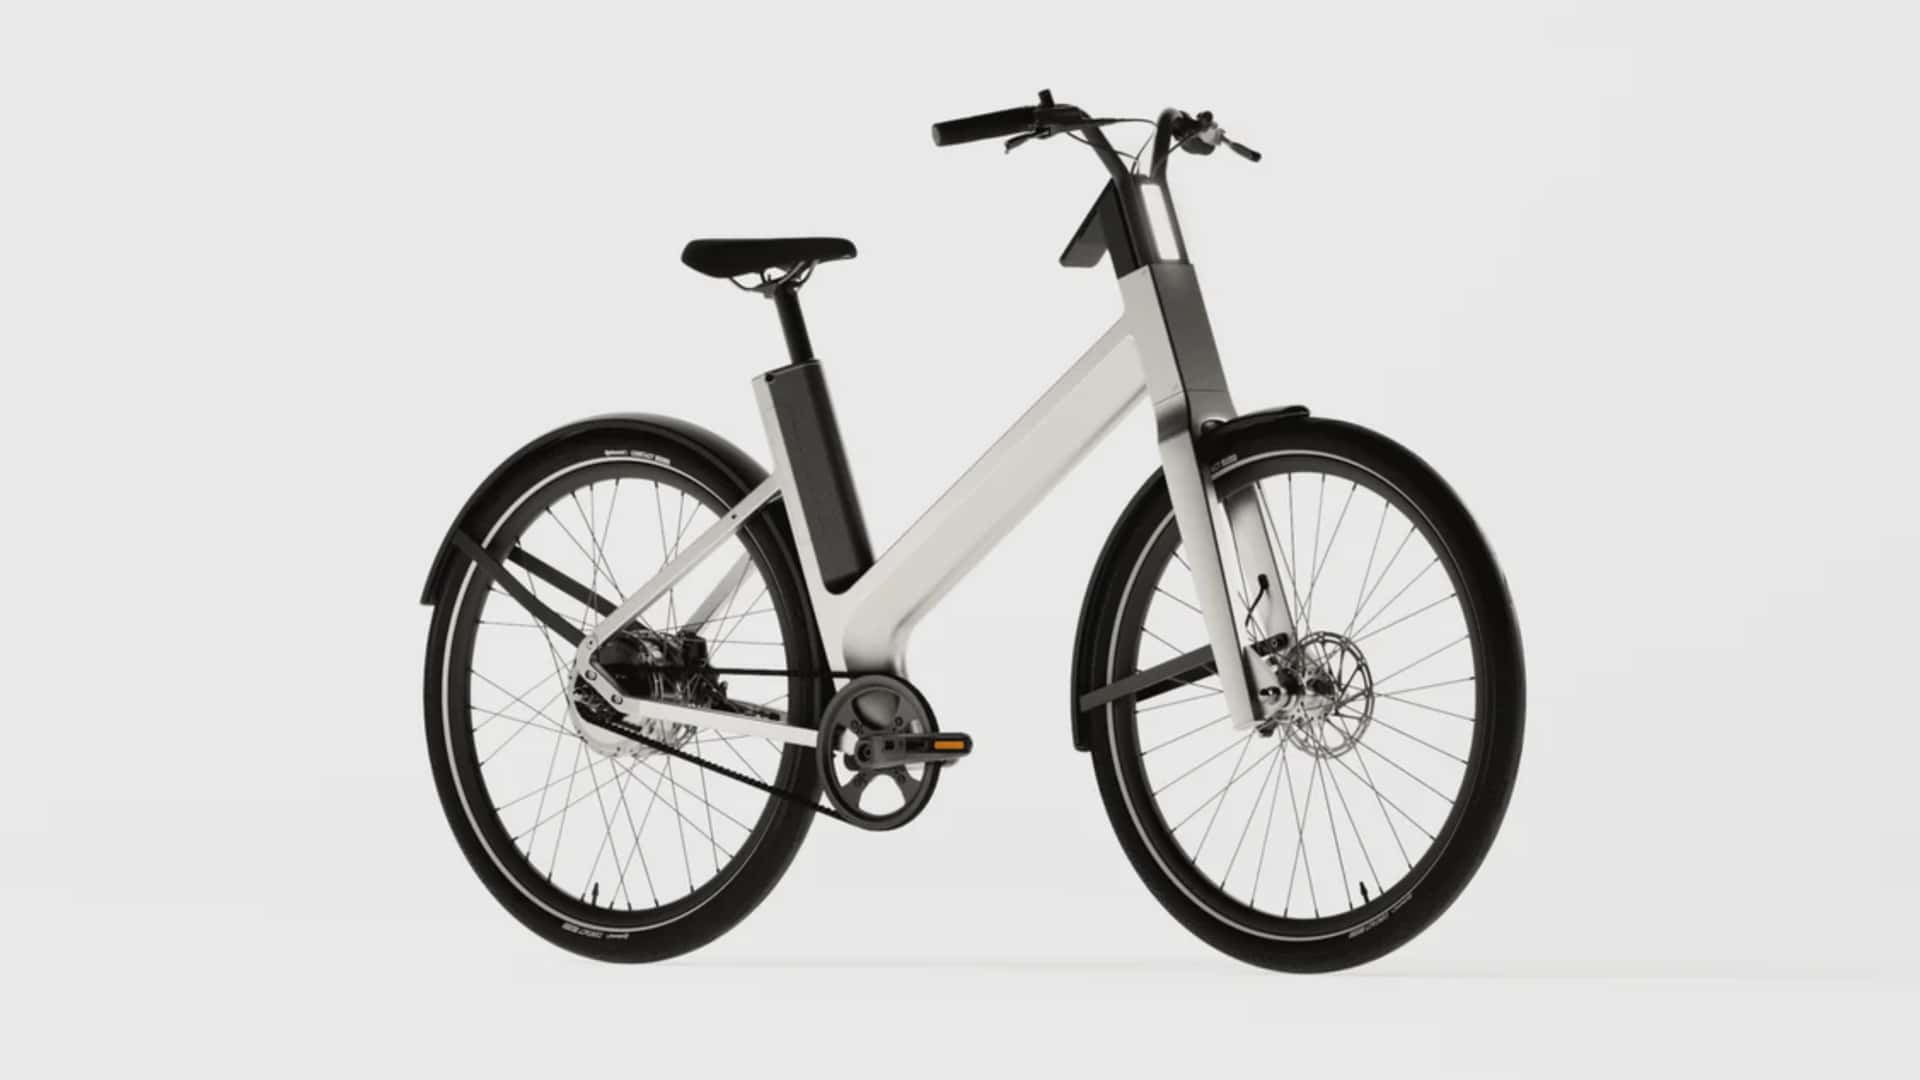 anod hybrid e-bike combines supercapacitors and lithium-ion batteries